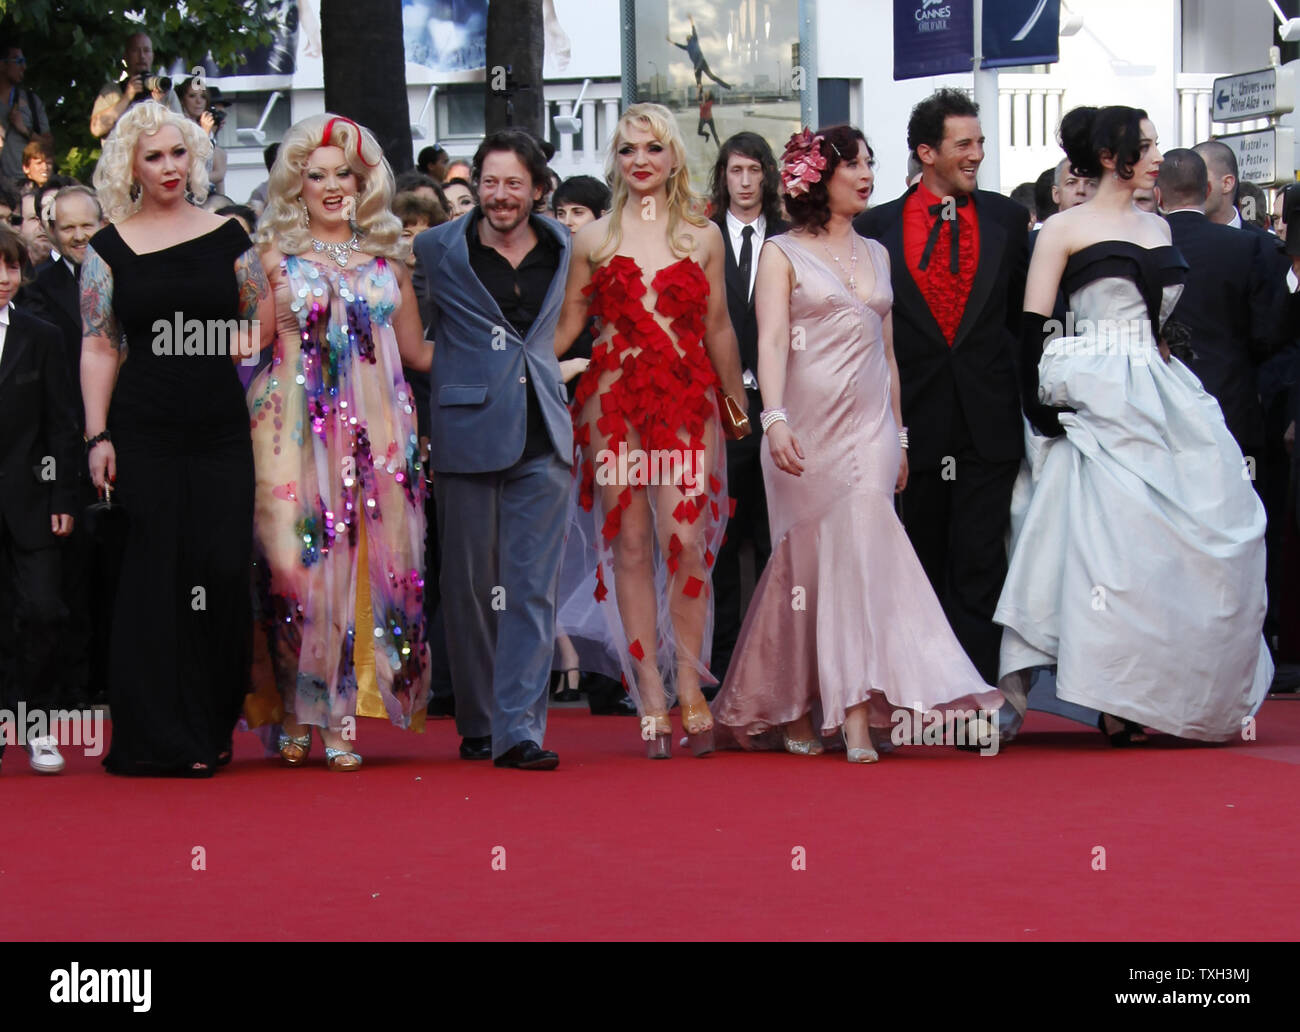 The cast of the film 'Tournee', including (from L to R) Mimi Le Meaux, Dirty Martini, Mathieu Amalric, Julie Atlas Muz, Kitten on the Keys, Roky Roulette and Evie Lovelle, arrives on the red carpet before the screening of their film during the 63rd annual Cannes International Film Festival in Cannes, France on May 13, 2010.  UPI/David Silpa Stock Photo